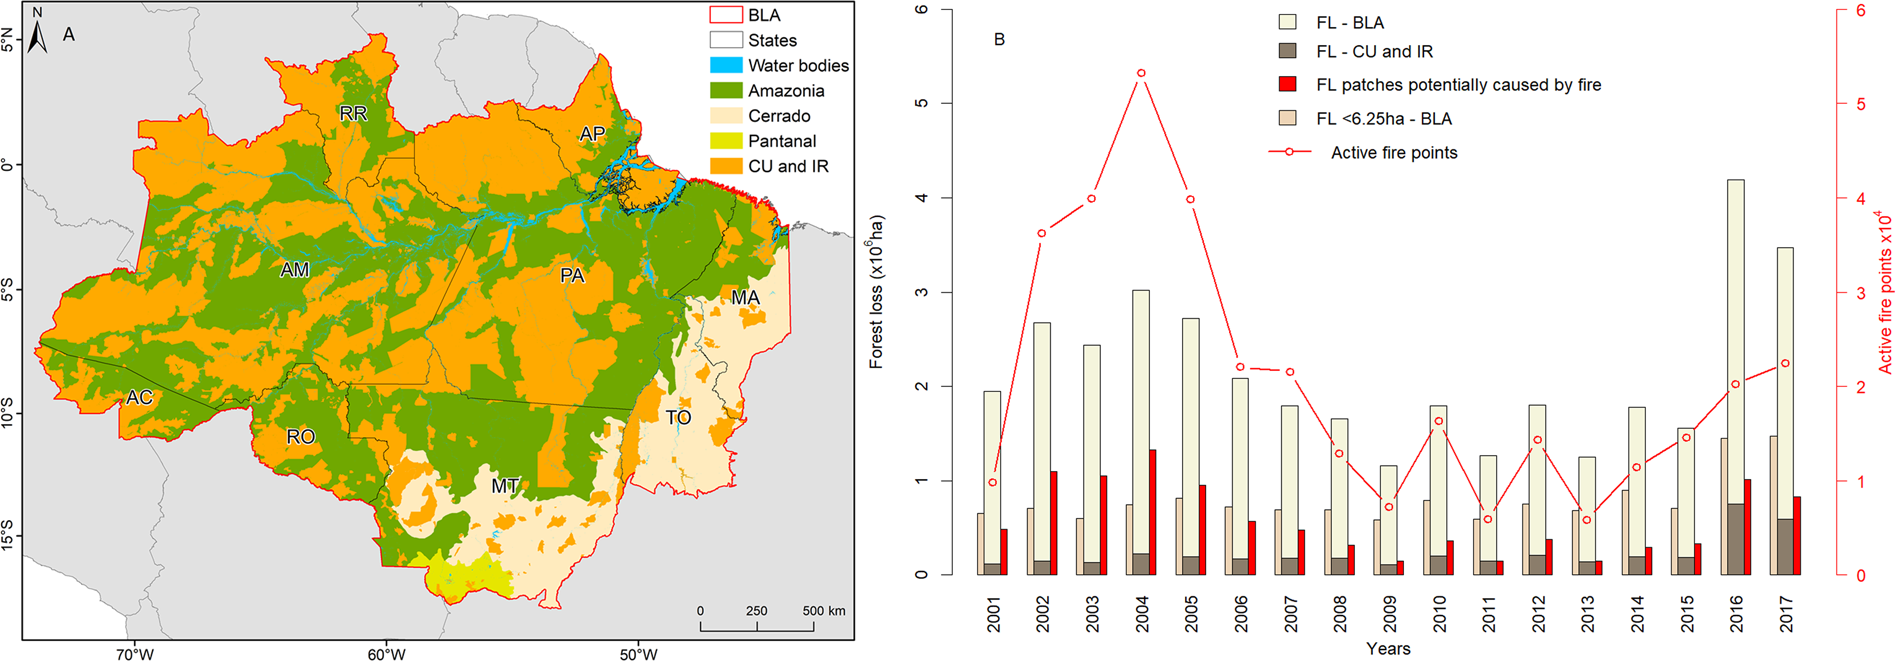 Increasing fragmentation of forest cover in Brazil's Legal Amazon from 2001  to 2017 | Scientific Reports